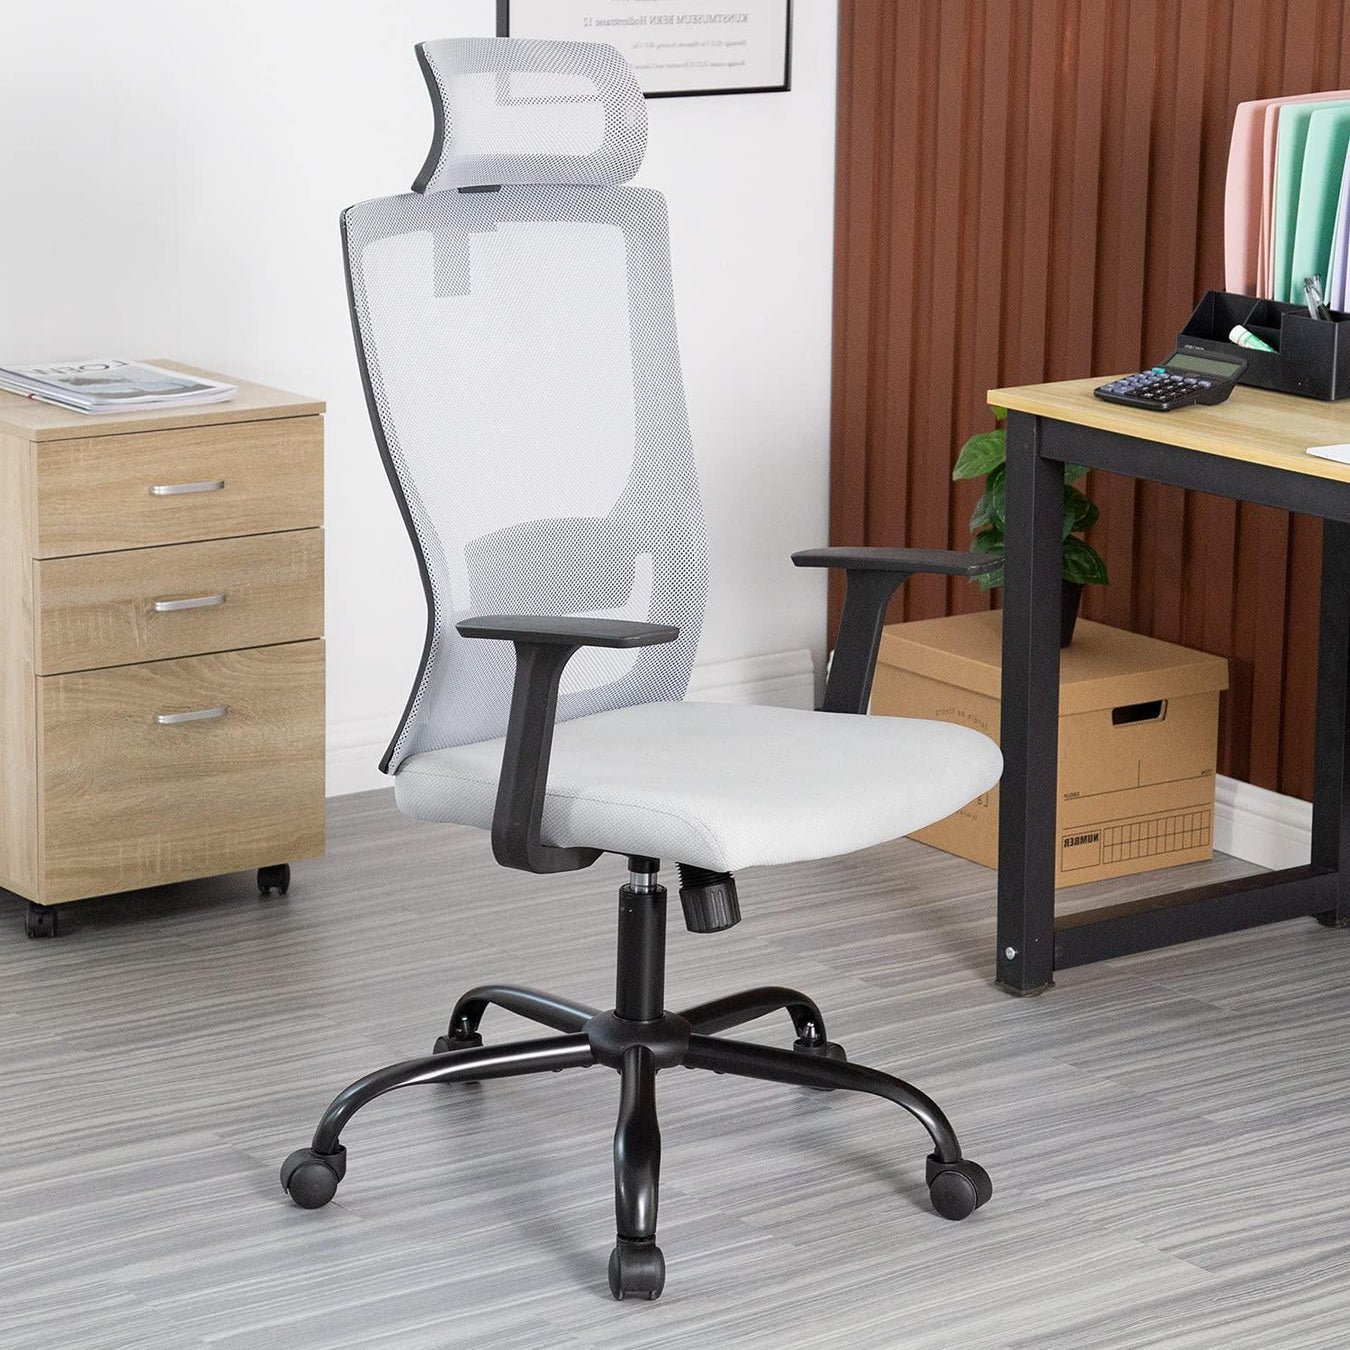 Modern and ergonomic office chairs in Dubai, Sharjah, Abu Dhabi, and all emirates of the UAE - Elevate your workspace with style and comfort